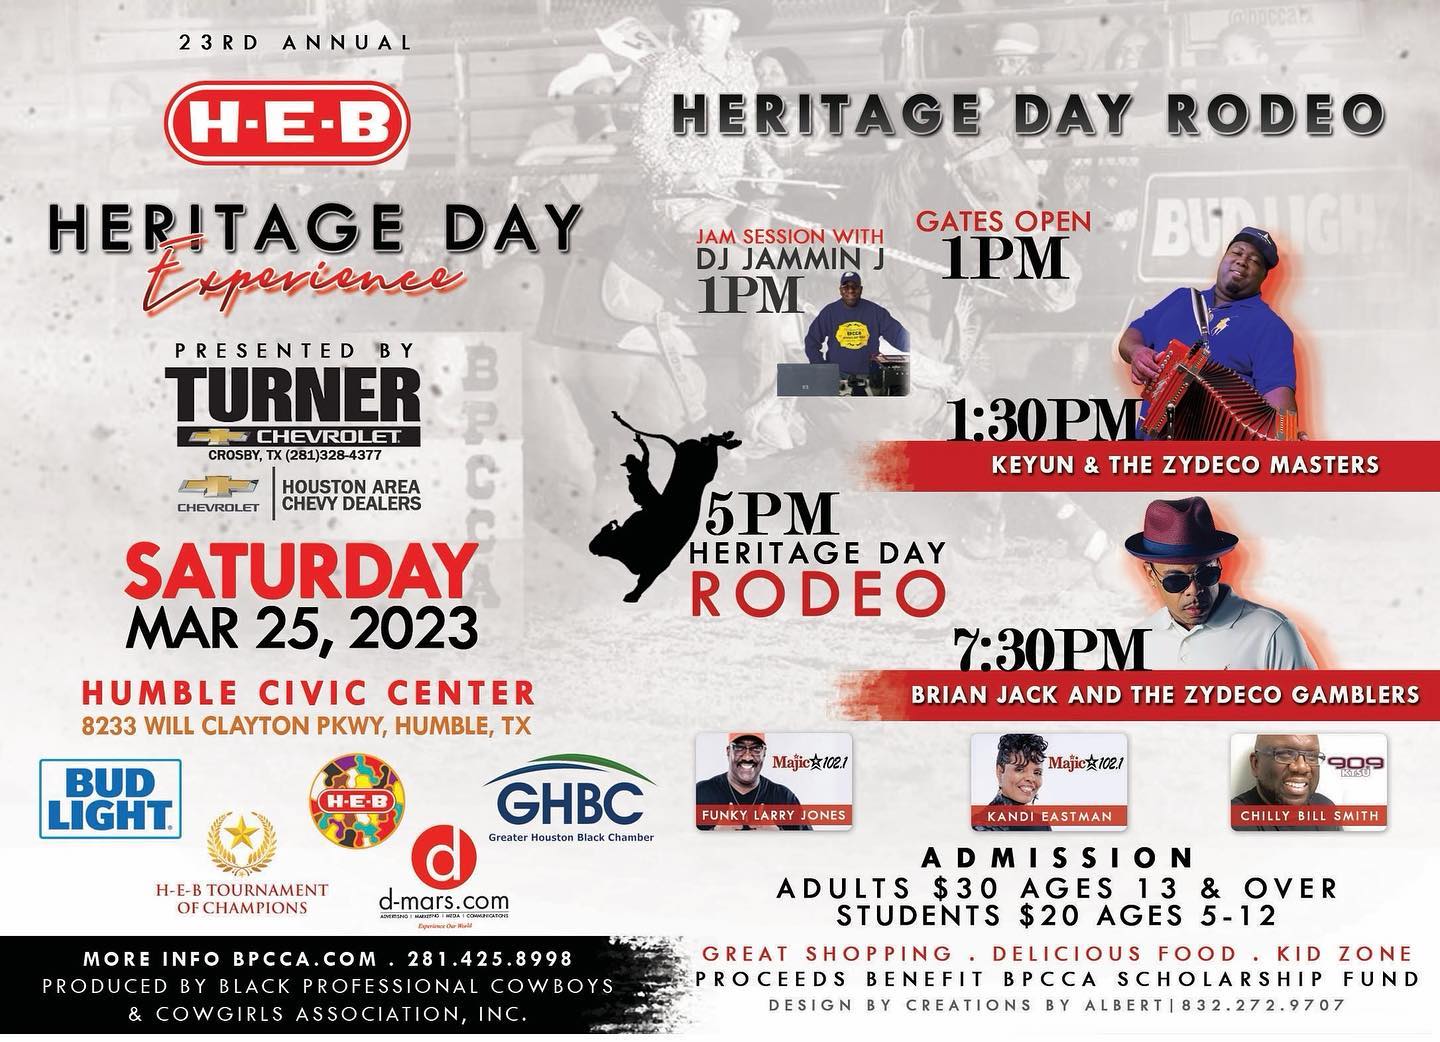 BPCCA presents the 23rd Annual HEB Rodeo